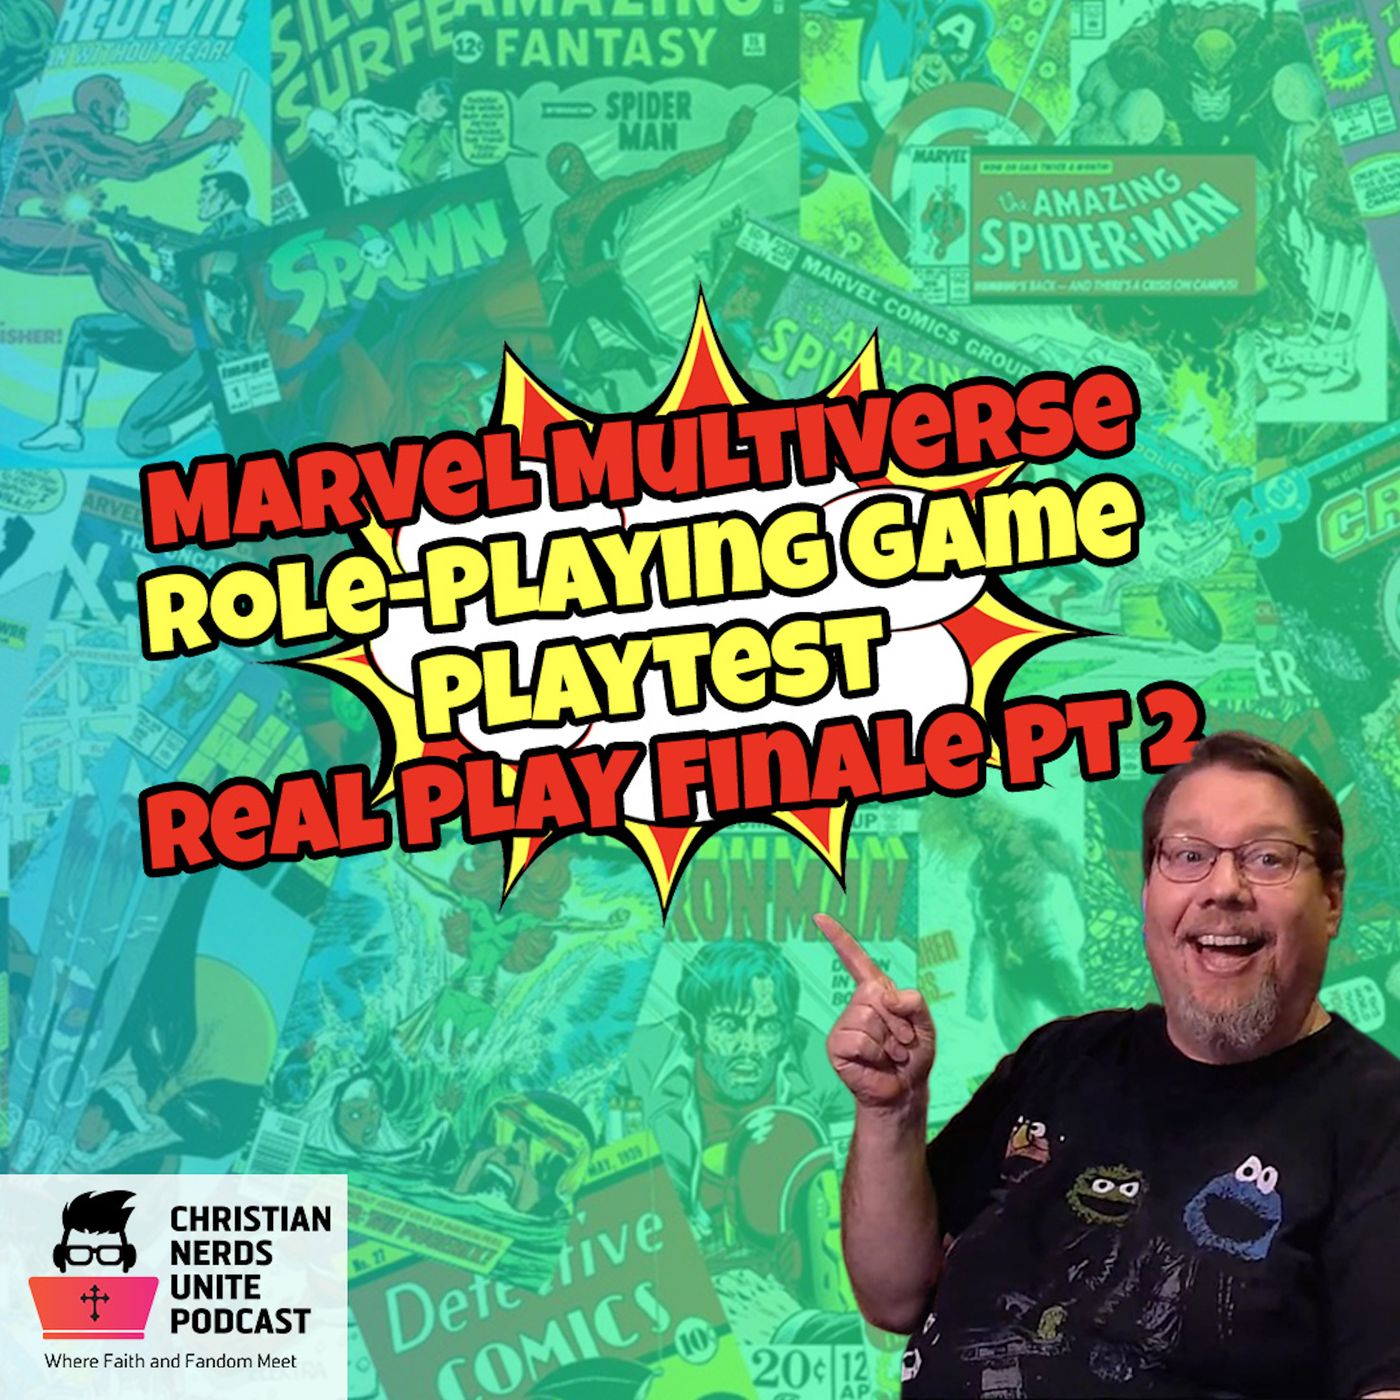 Marvel Multiverse Role-Playing game Playtest Real Play Finale Part 2